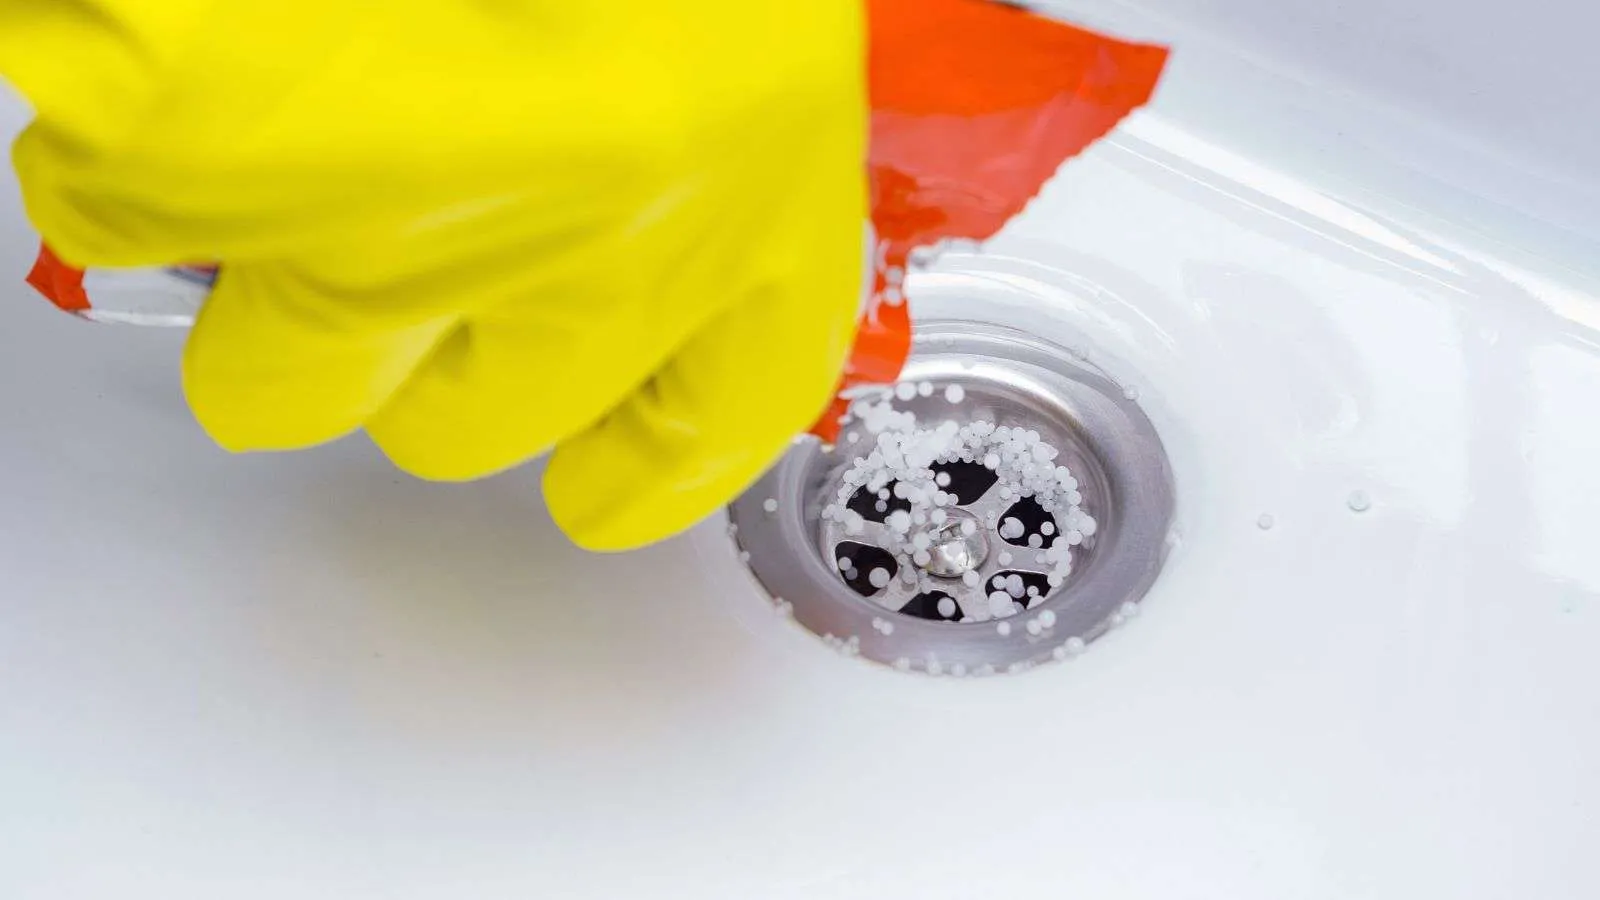 Cleaning bathroom drains - bighomeprojects.com